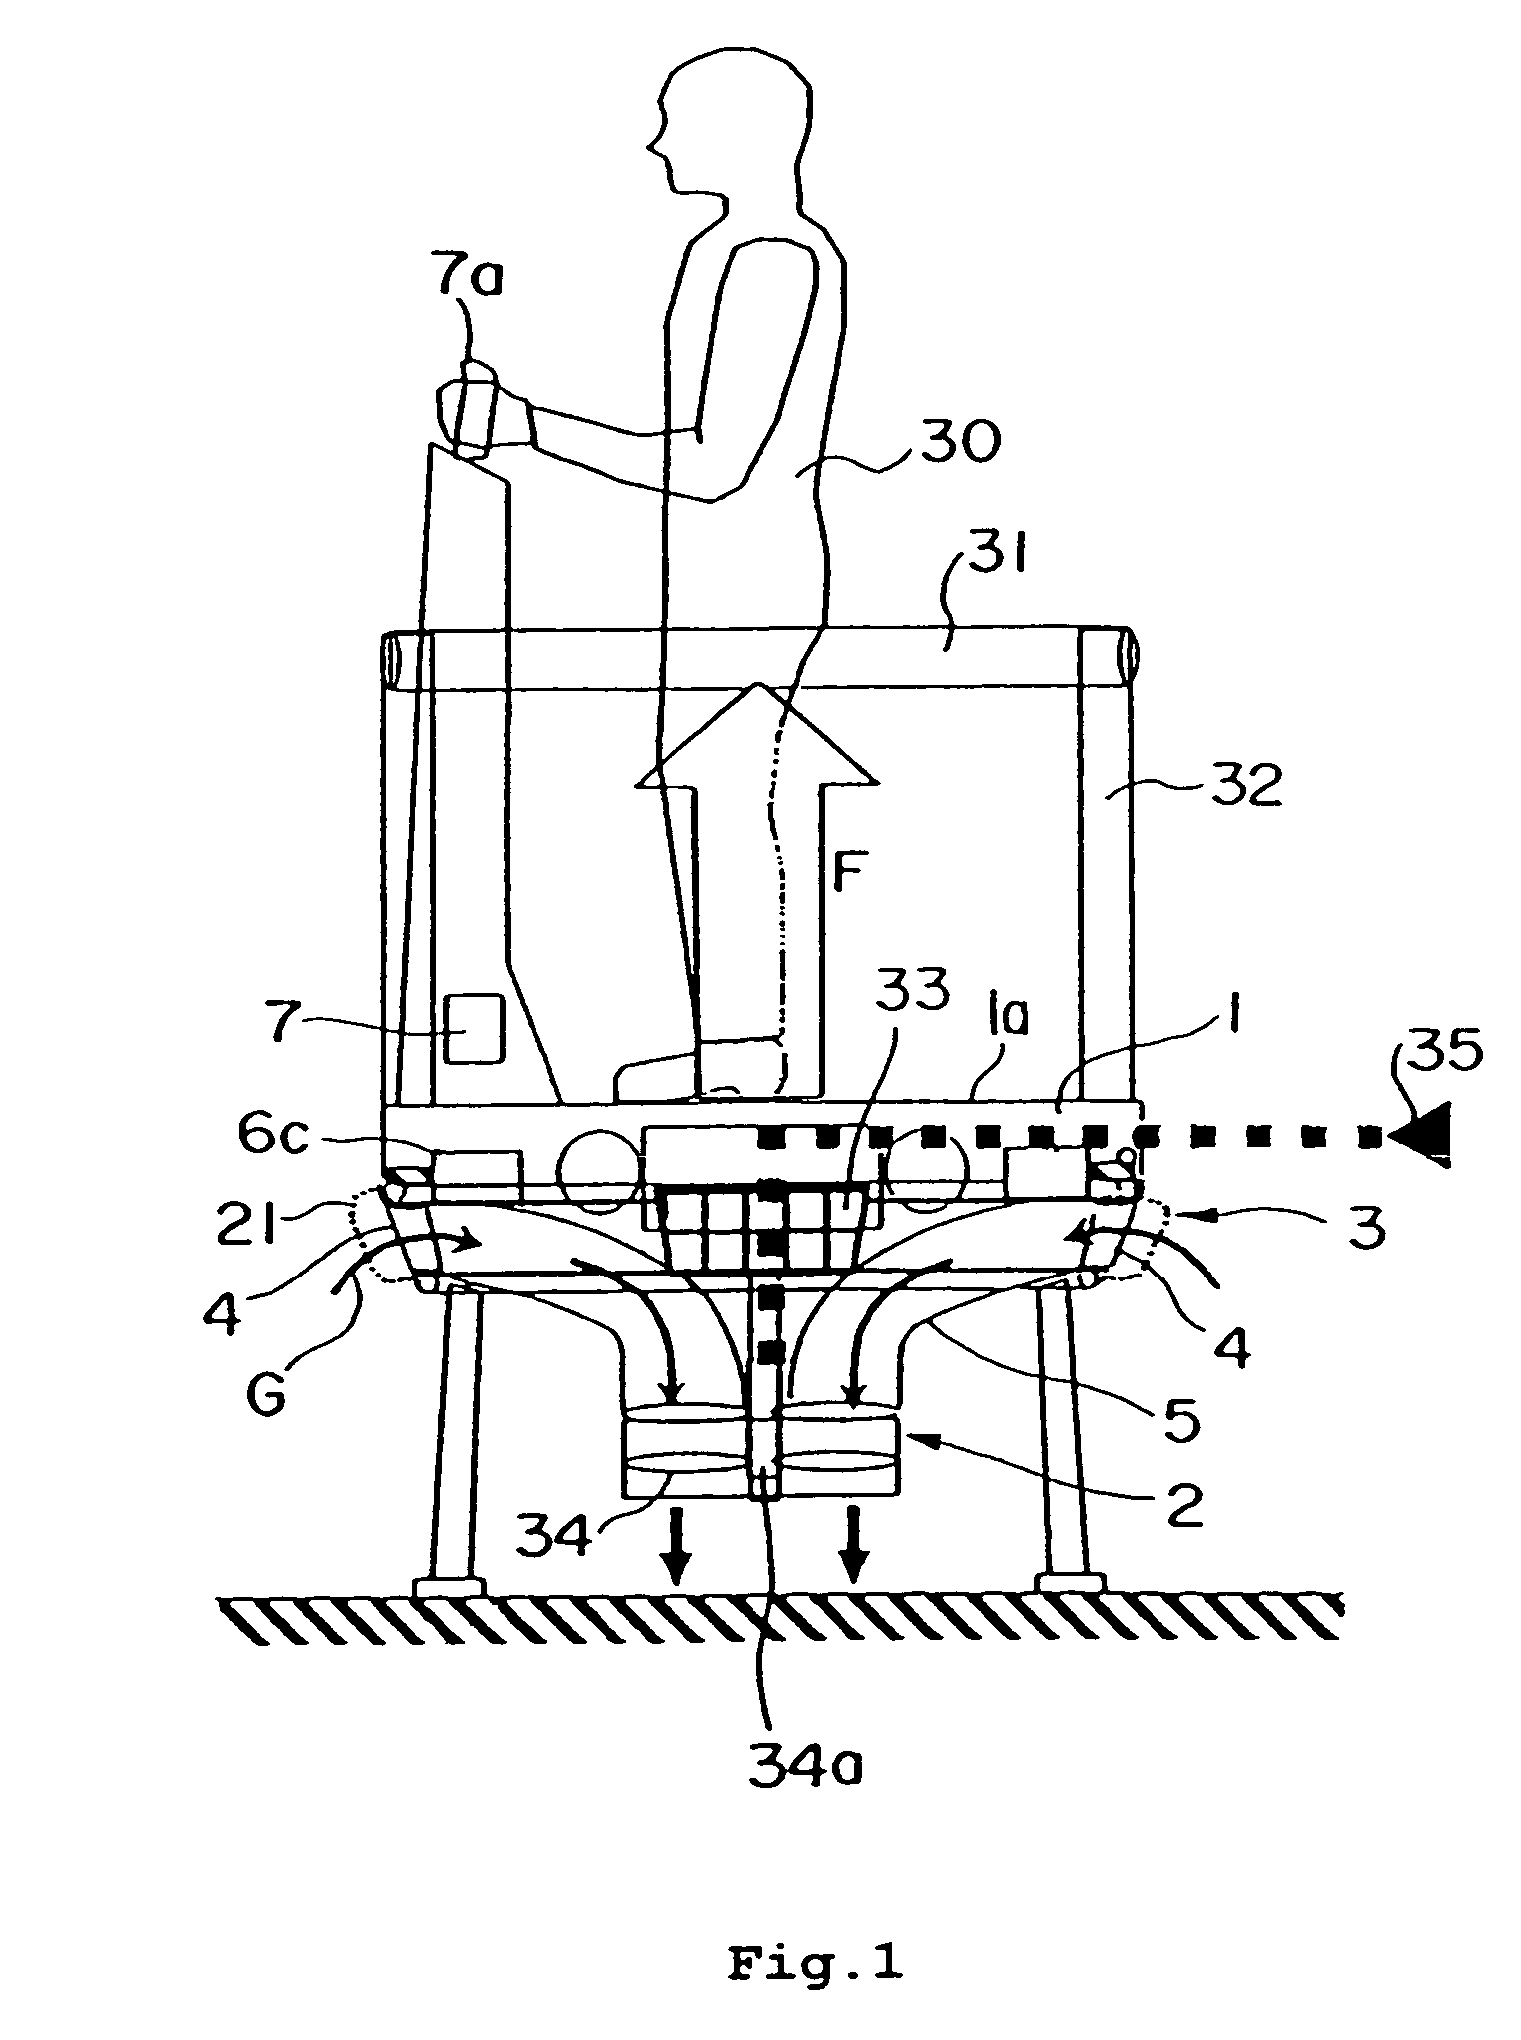 Vertical takeoff and landing apparatus